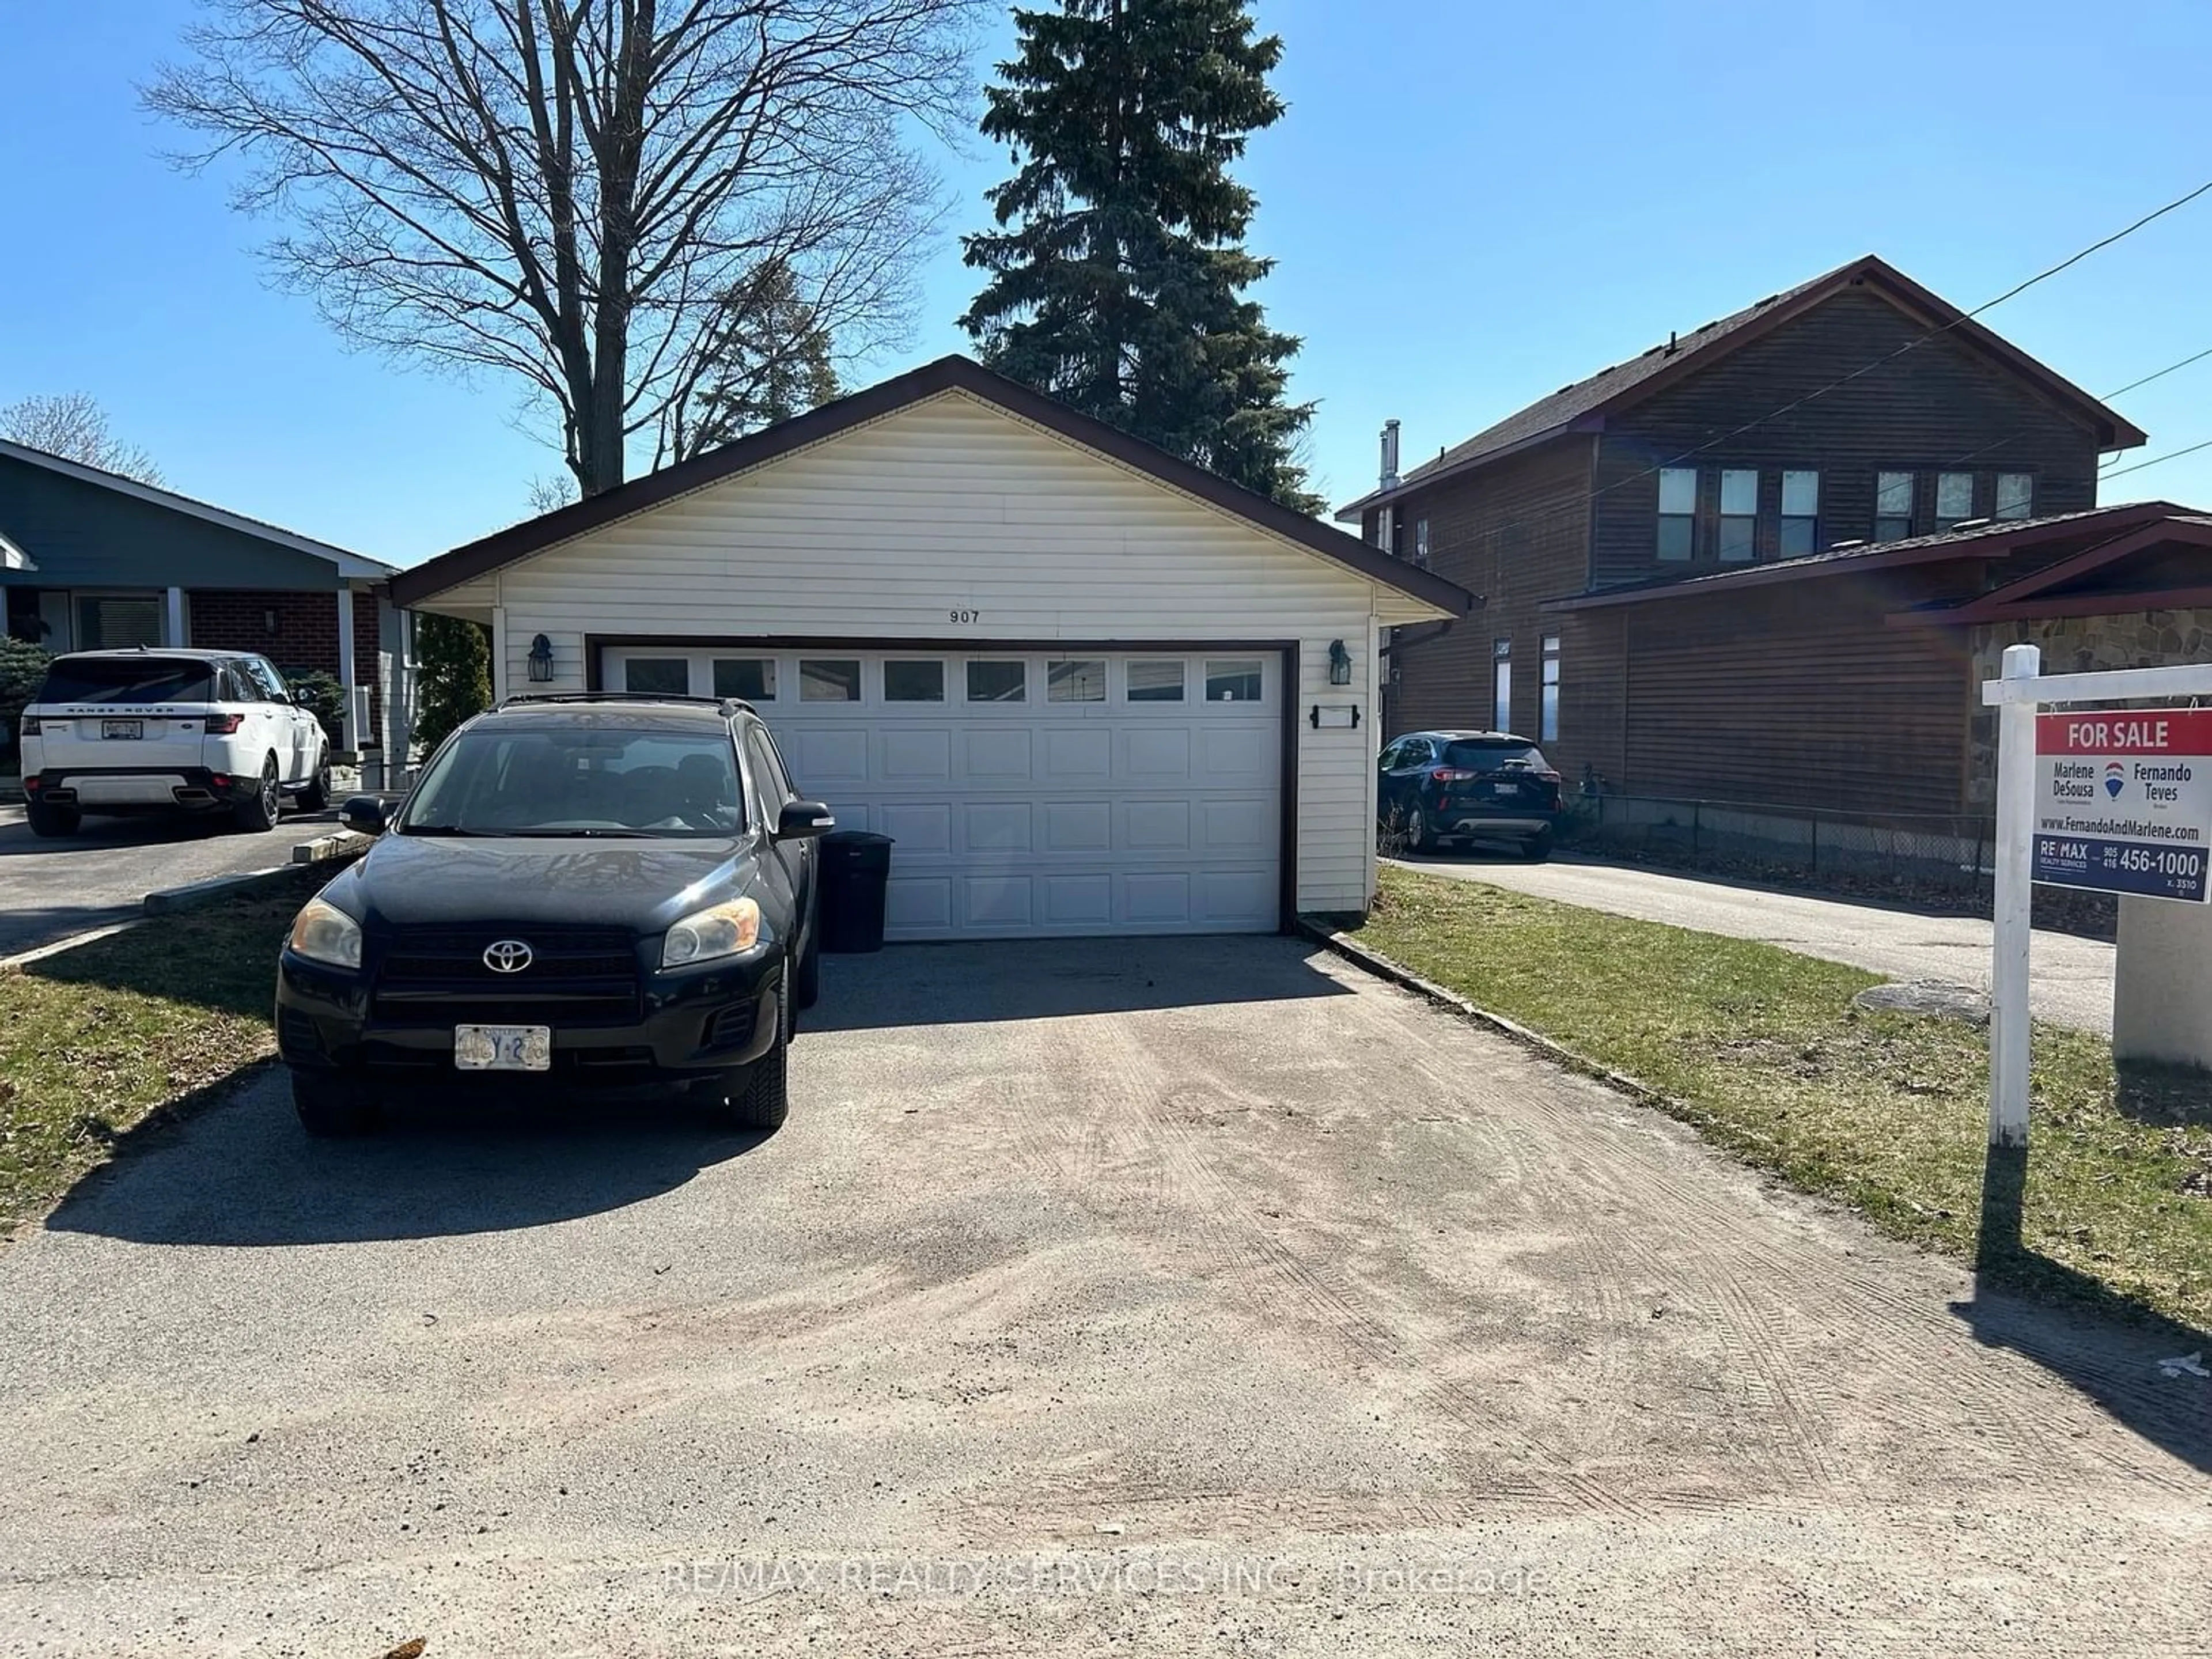 Frontside or backside of a home for 907 Adams Rd, Innisfil Ontario L9S 4C9